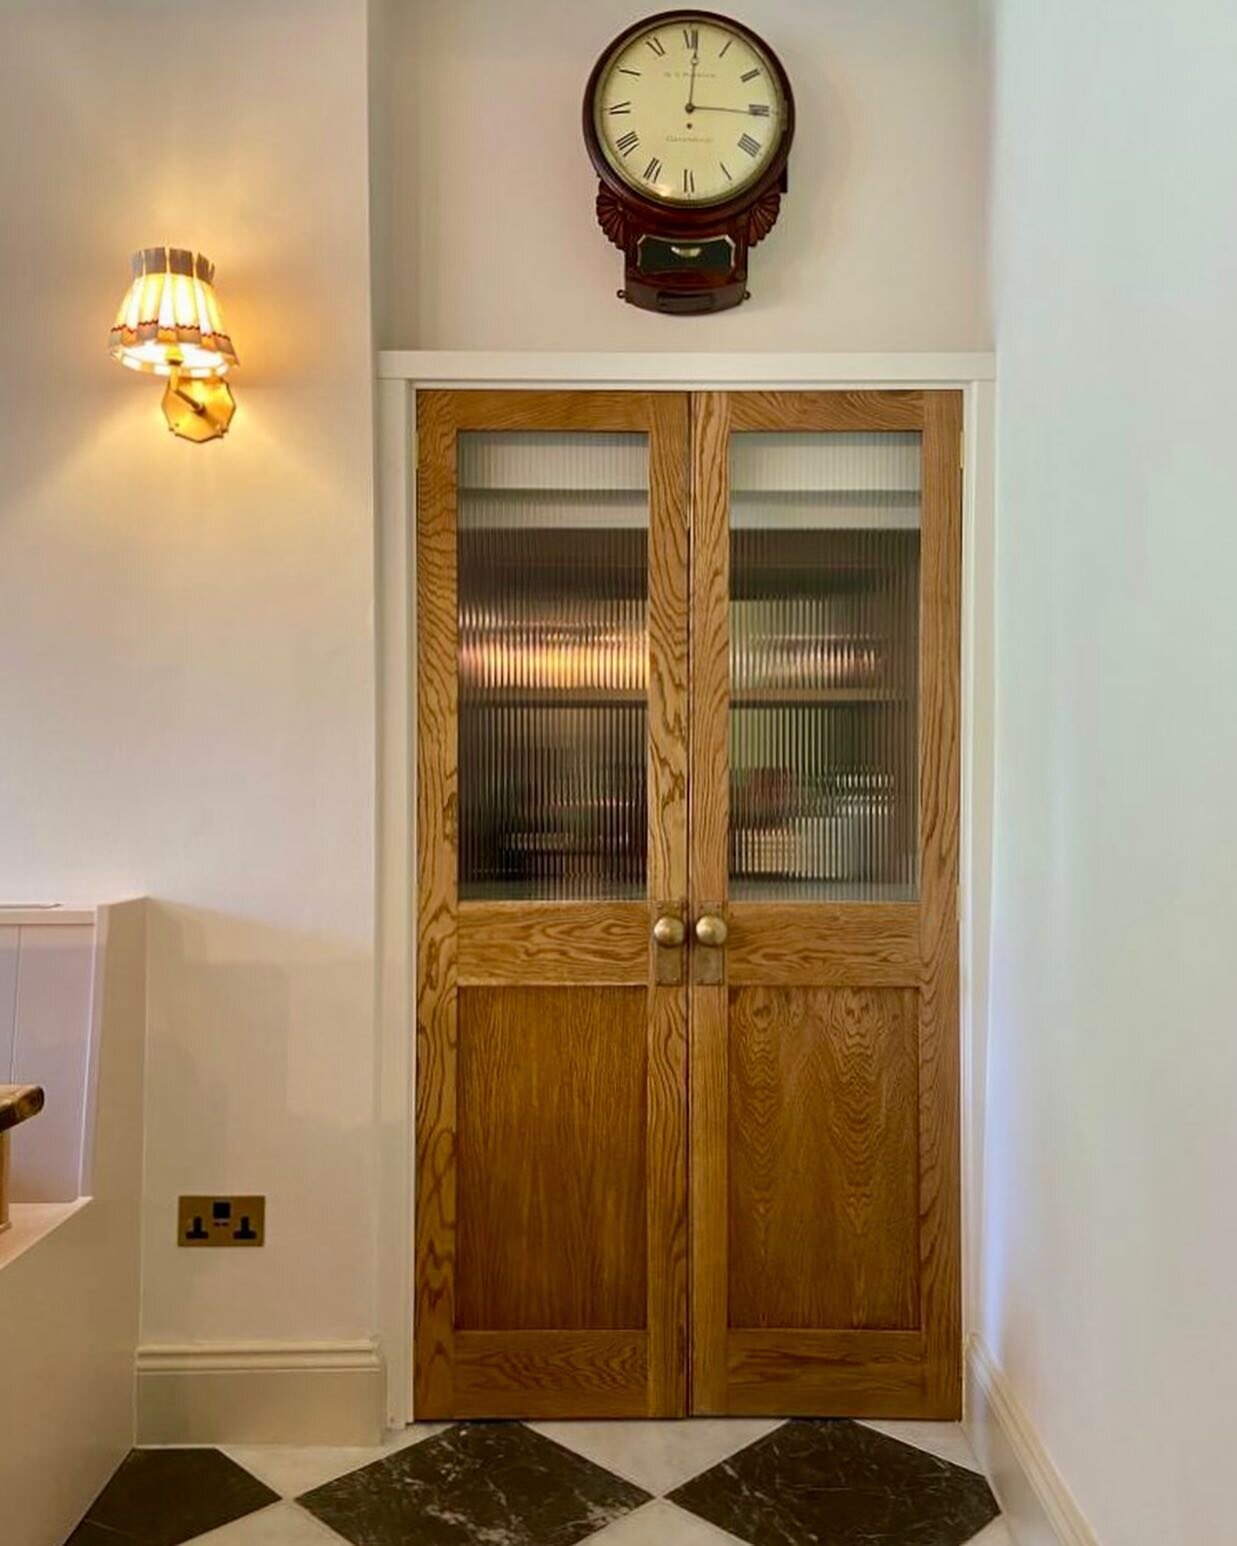 What goes on behind closed doors? Well, in this case, something pretty special*&hellip;

A stunning alcove drinks bar with a calacatta viola marble top, mirrored backing, oak shelving and a wine cooler. 

*Can I have some wine🍷 to go with that chees